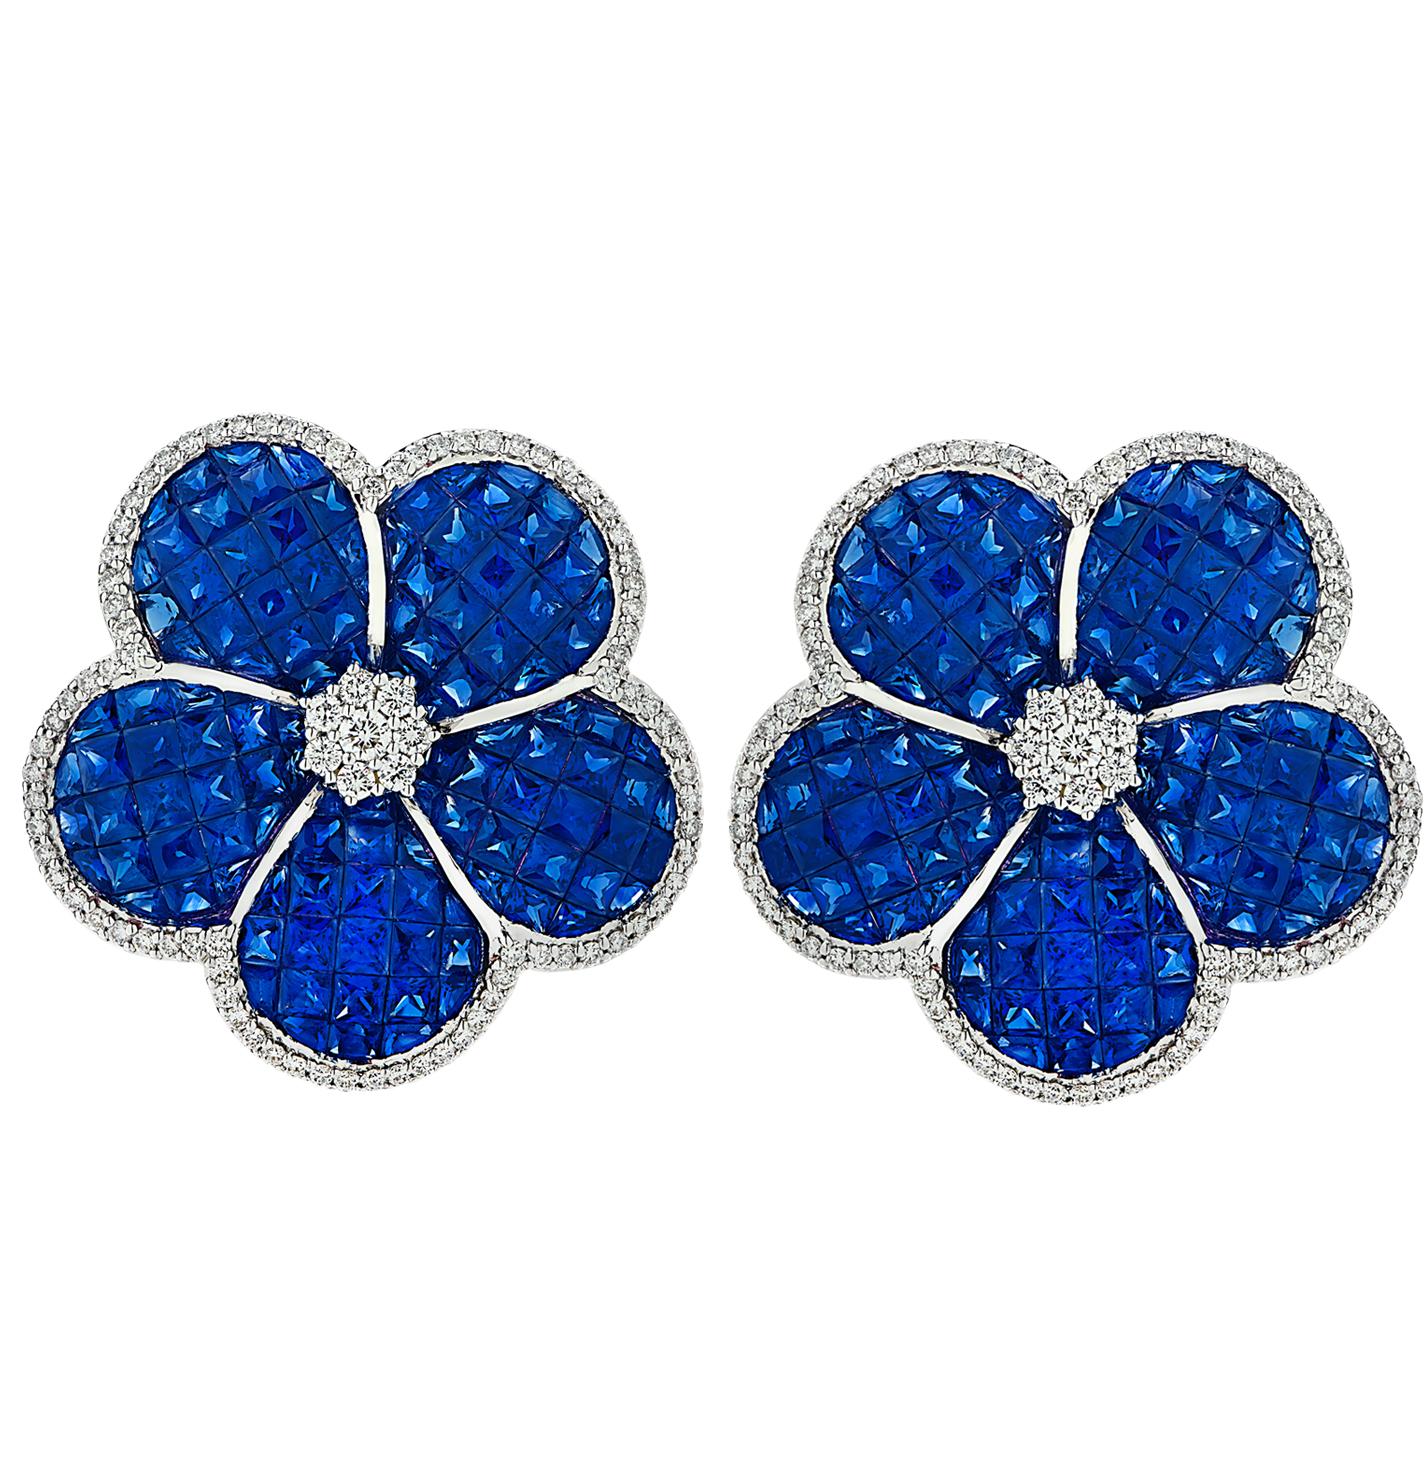 Spectacular Sapphire and diamond leaver back earrings crafted in 18 karat white gold, showcasing 20.05 Carats of invisibly set blue sapphires weighing 22.05 carats, further accented by 1.44 carats of round brilliant cut diamonds, G Color, VS